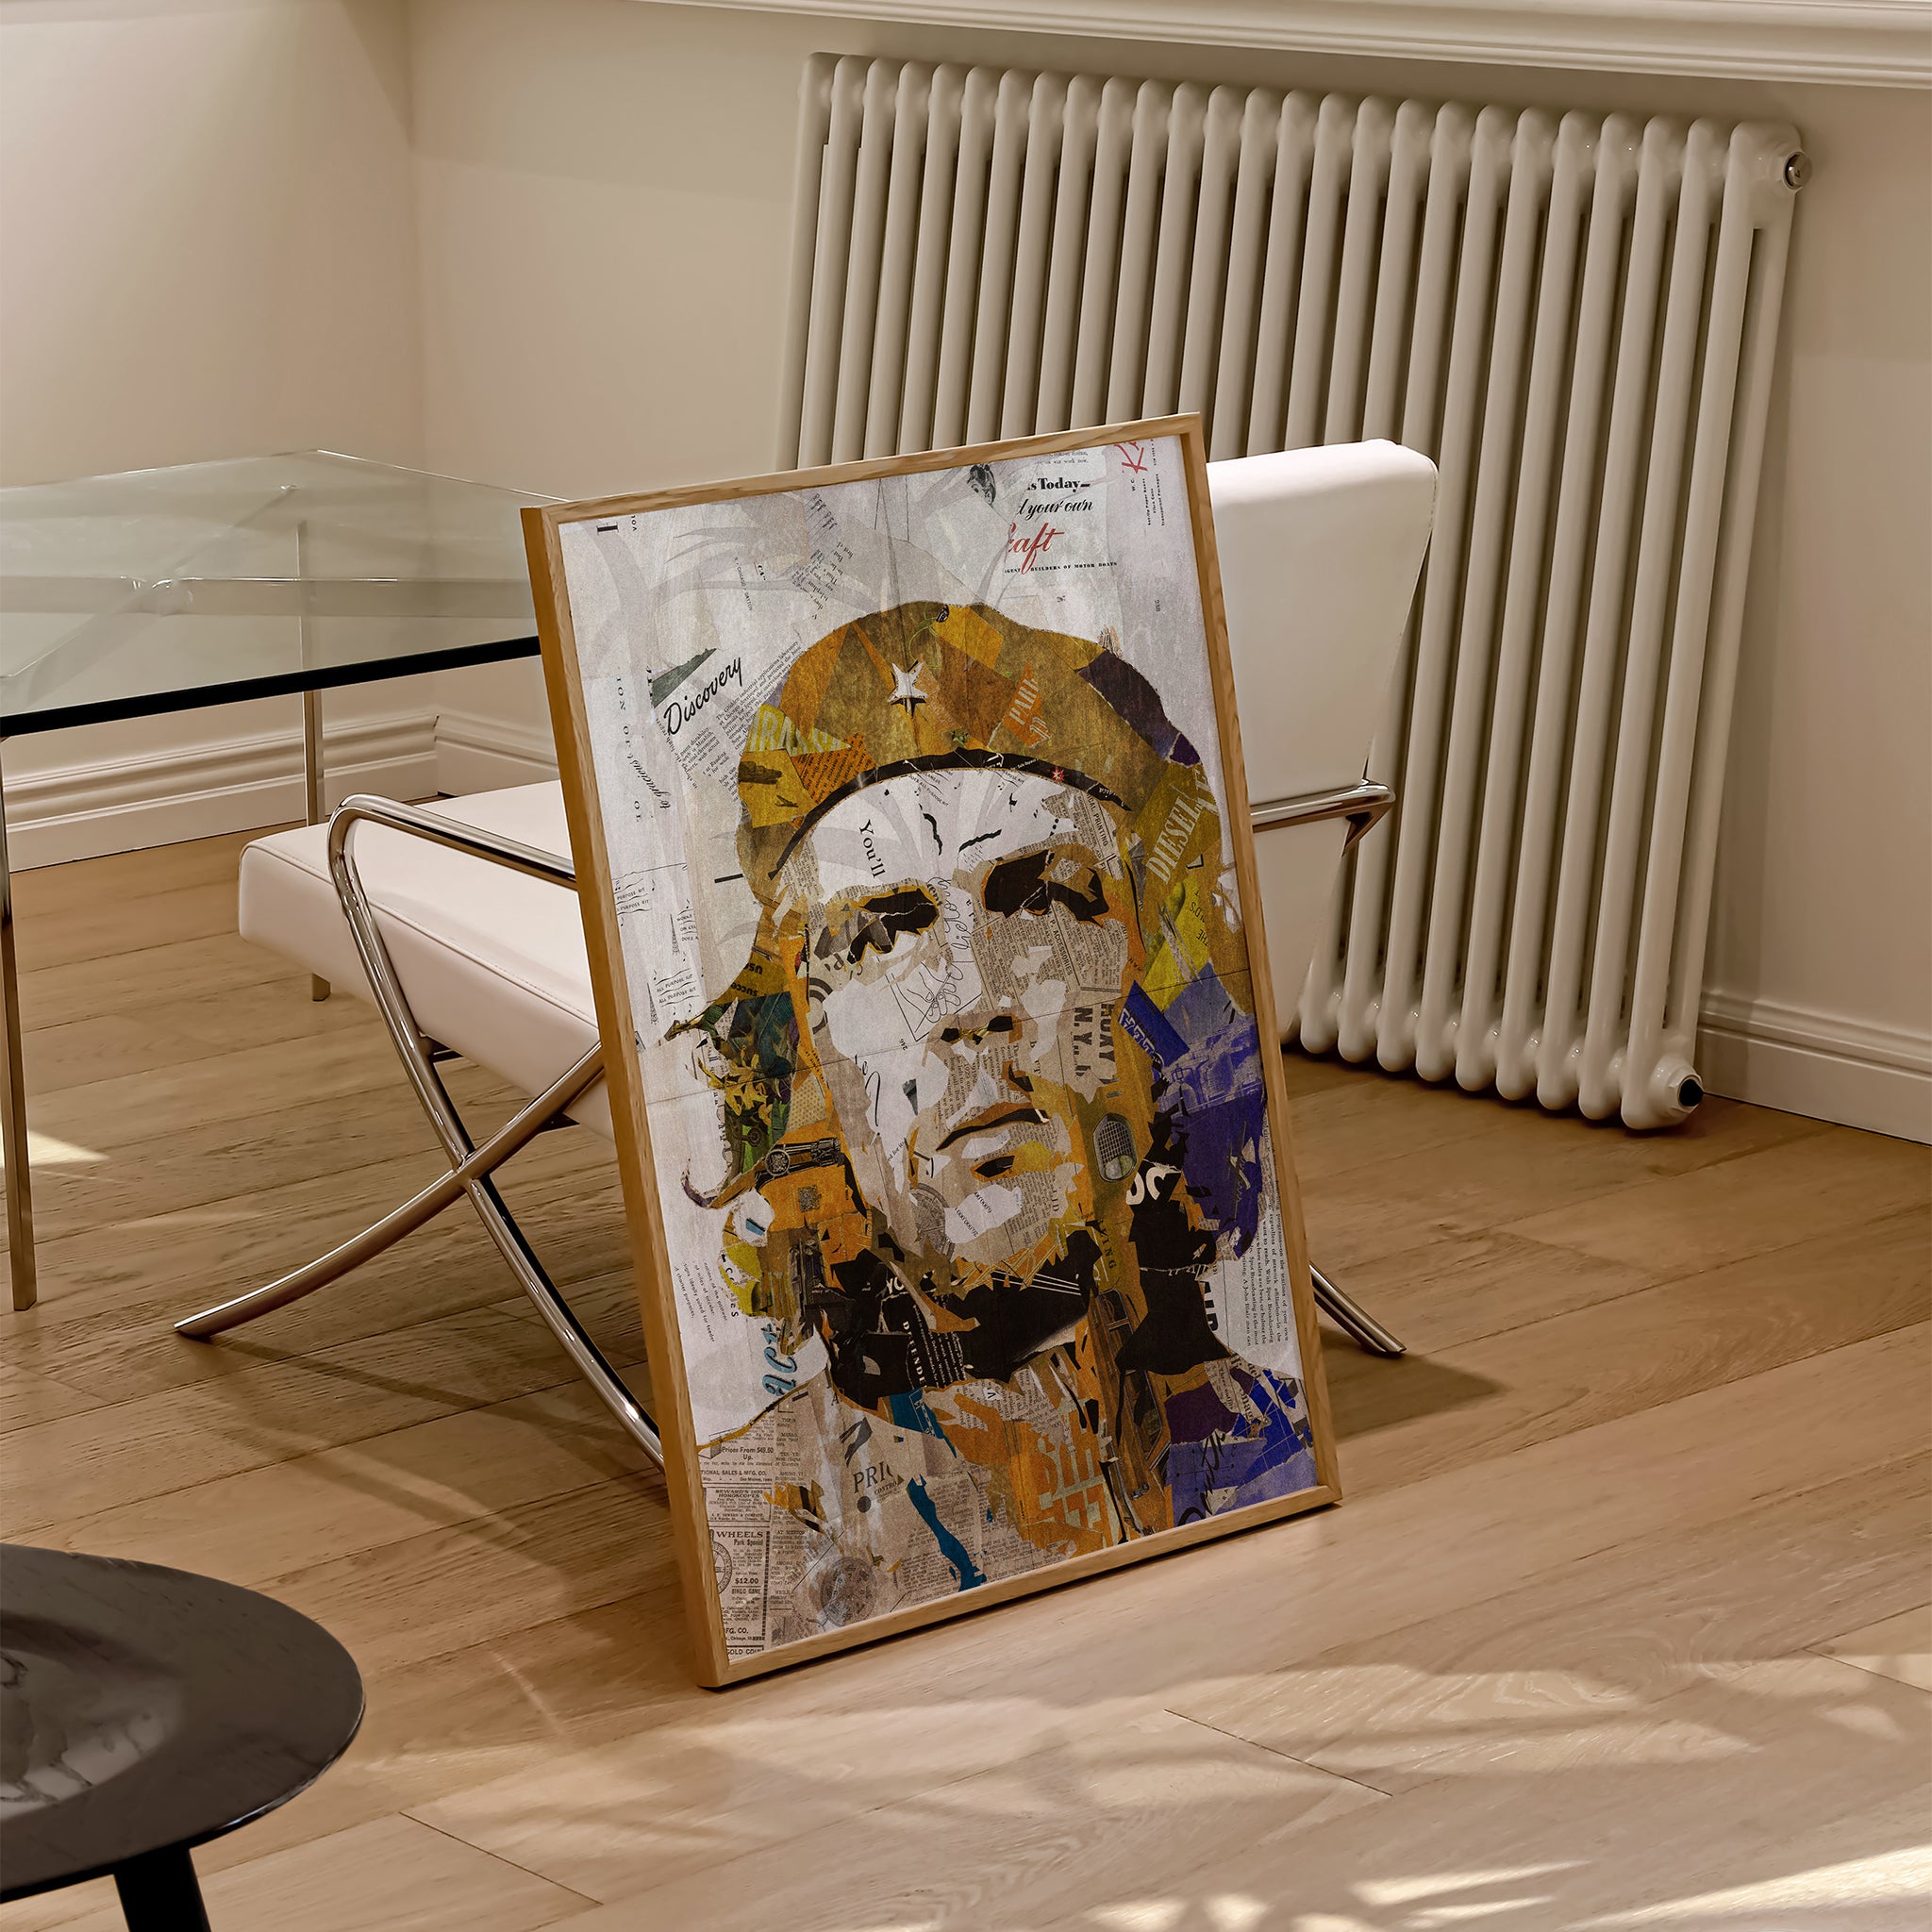 Be inspired by our iconic collage portrait art print of Che Guevara. This artwork was printed using the giclée process on archival acid-free paper and is presented in a natural oak frame, capturing its timeless beauty in every detail.